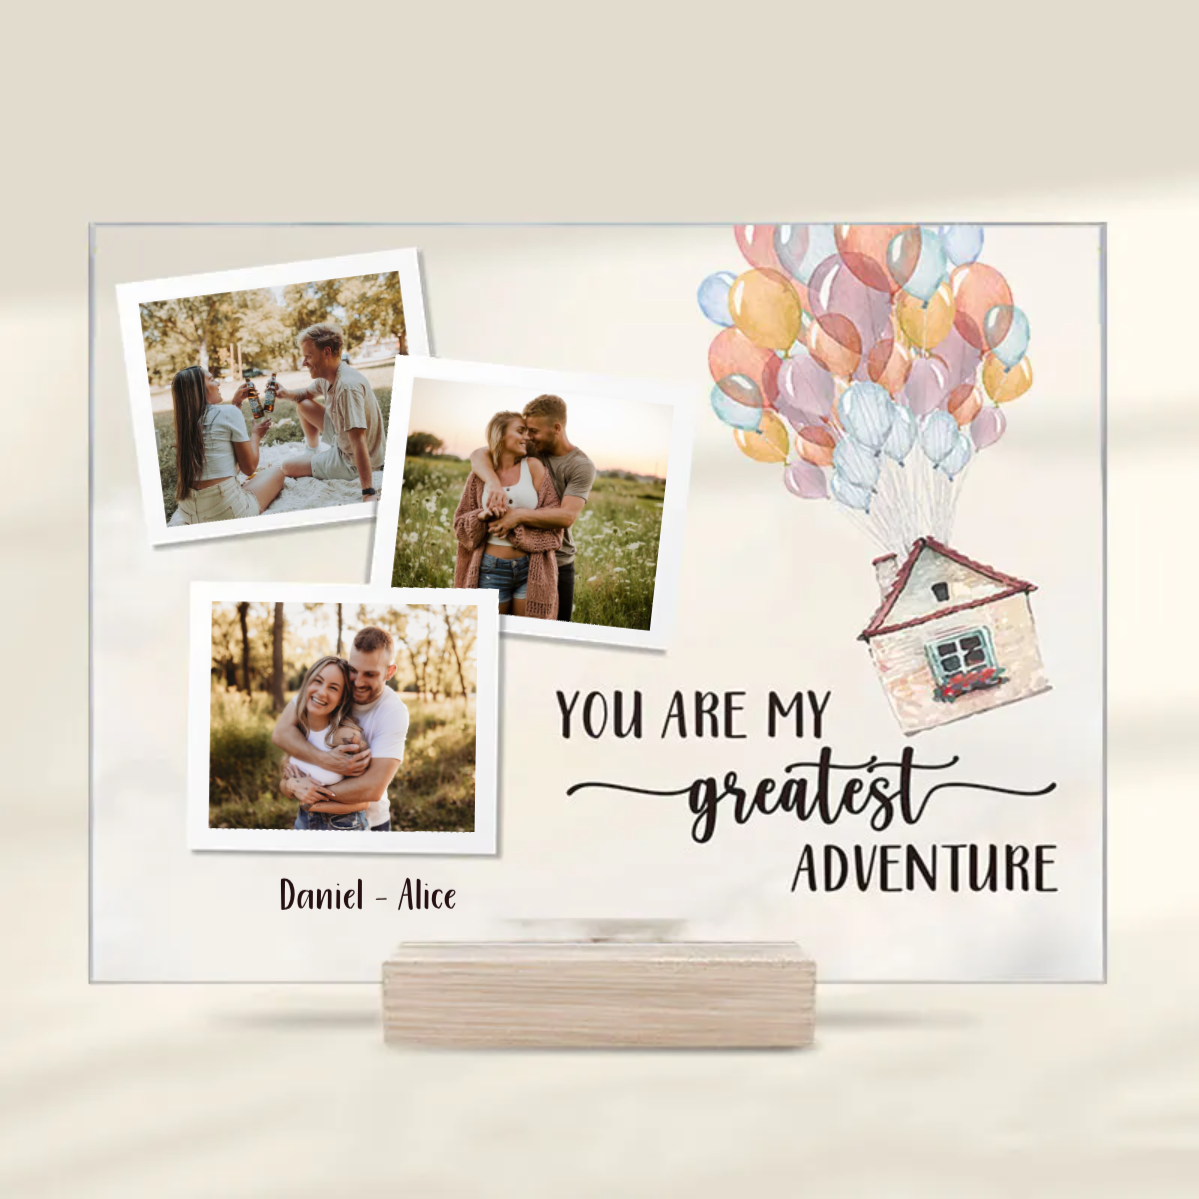 Custom Photo All Of Me Loves All Of You - Gift For Couples - Personalized Acrylic Plaque